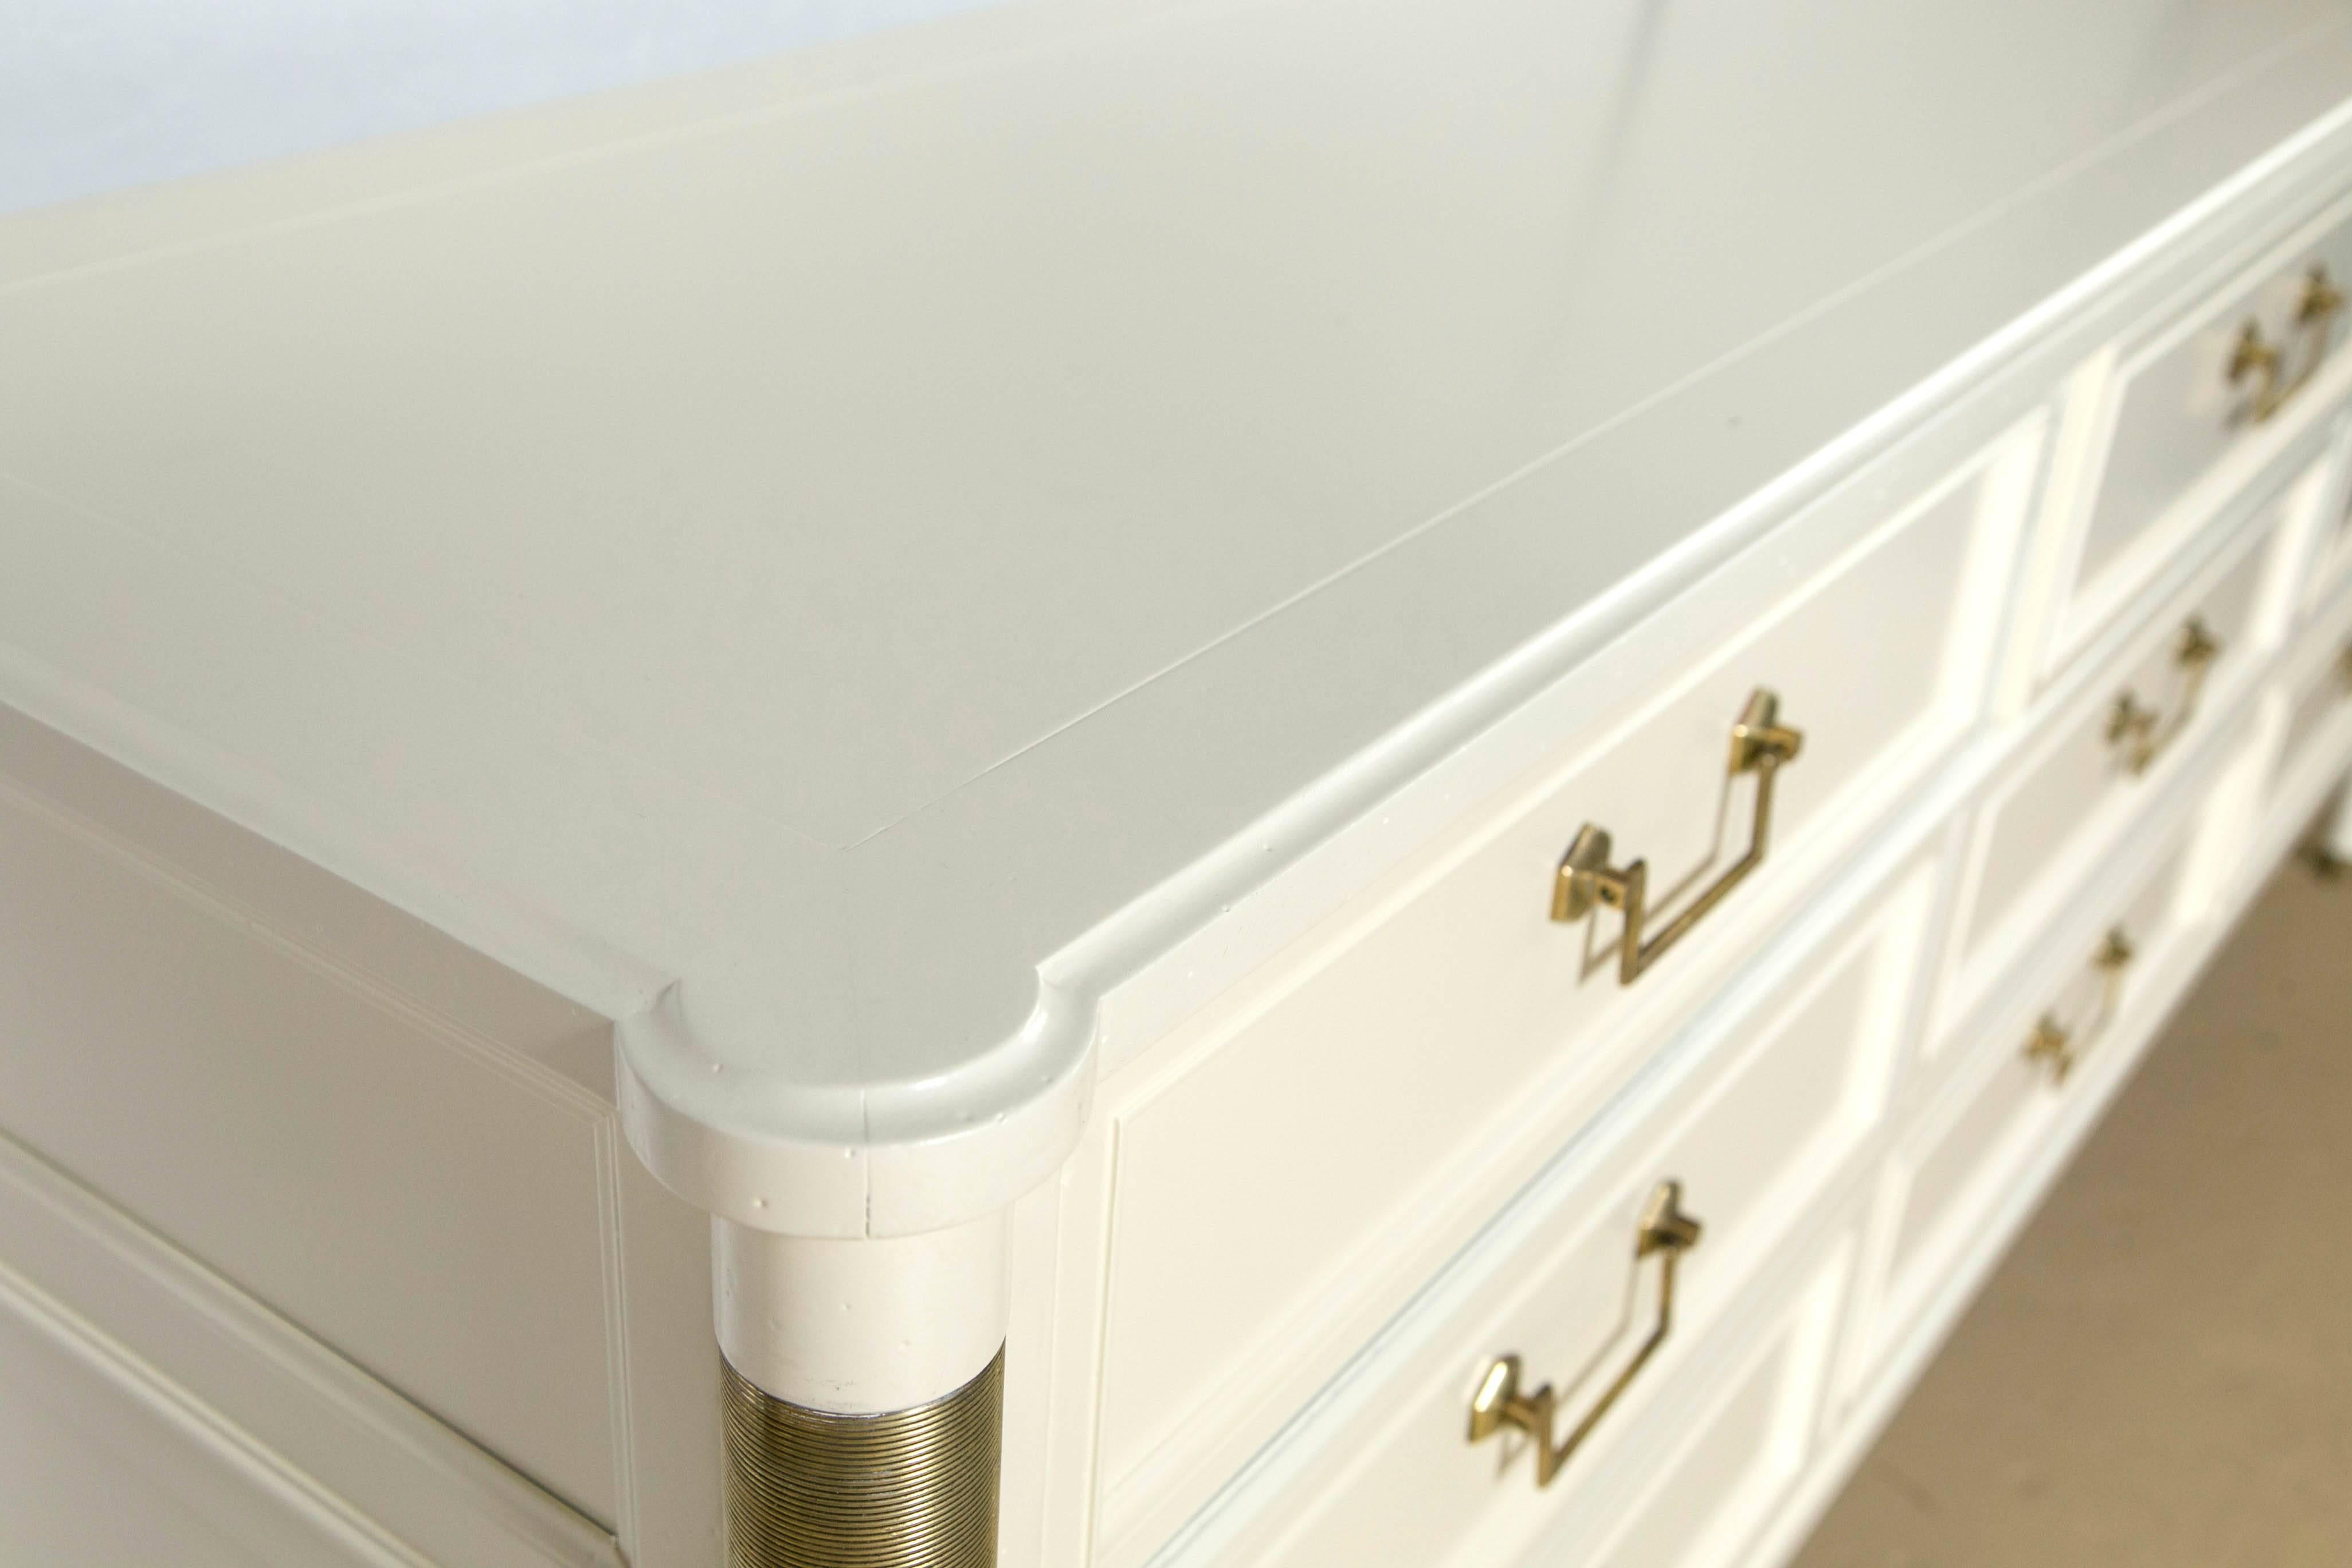 A fine Baker Furniture Company white lacquered nine-drawer dresser or commode. The oak secondary chest is a prime example of detail to workmanship. The Louis XVI style chest has bronze moldings and cookie cutter corners. Having nine drawers overall